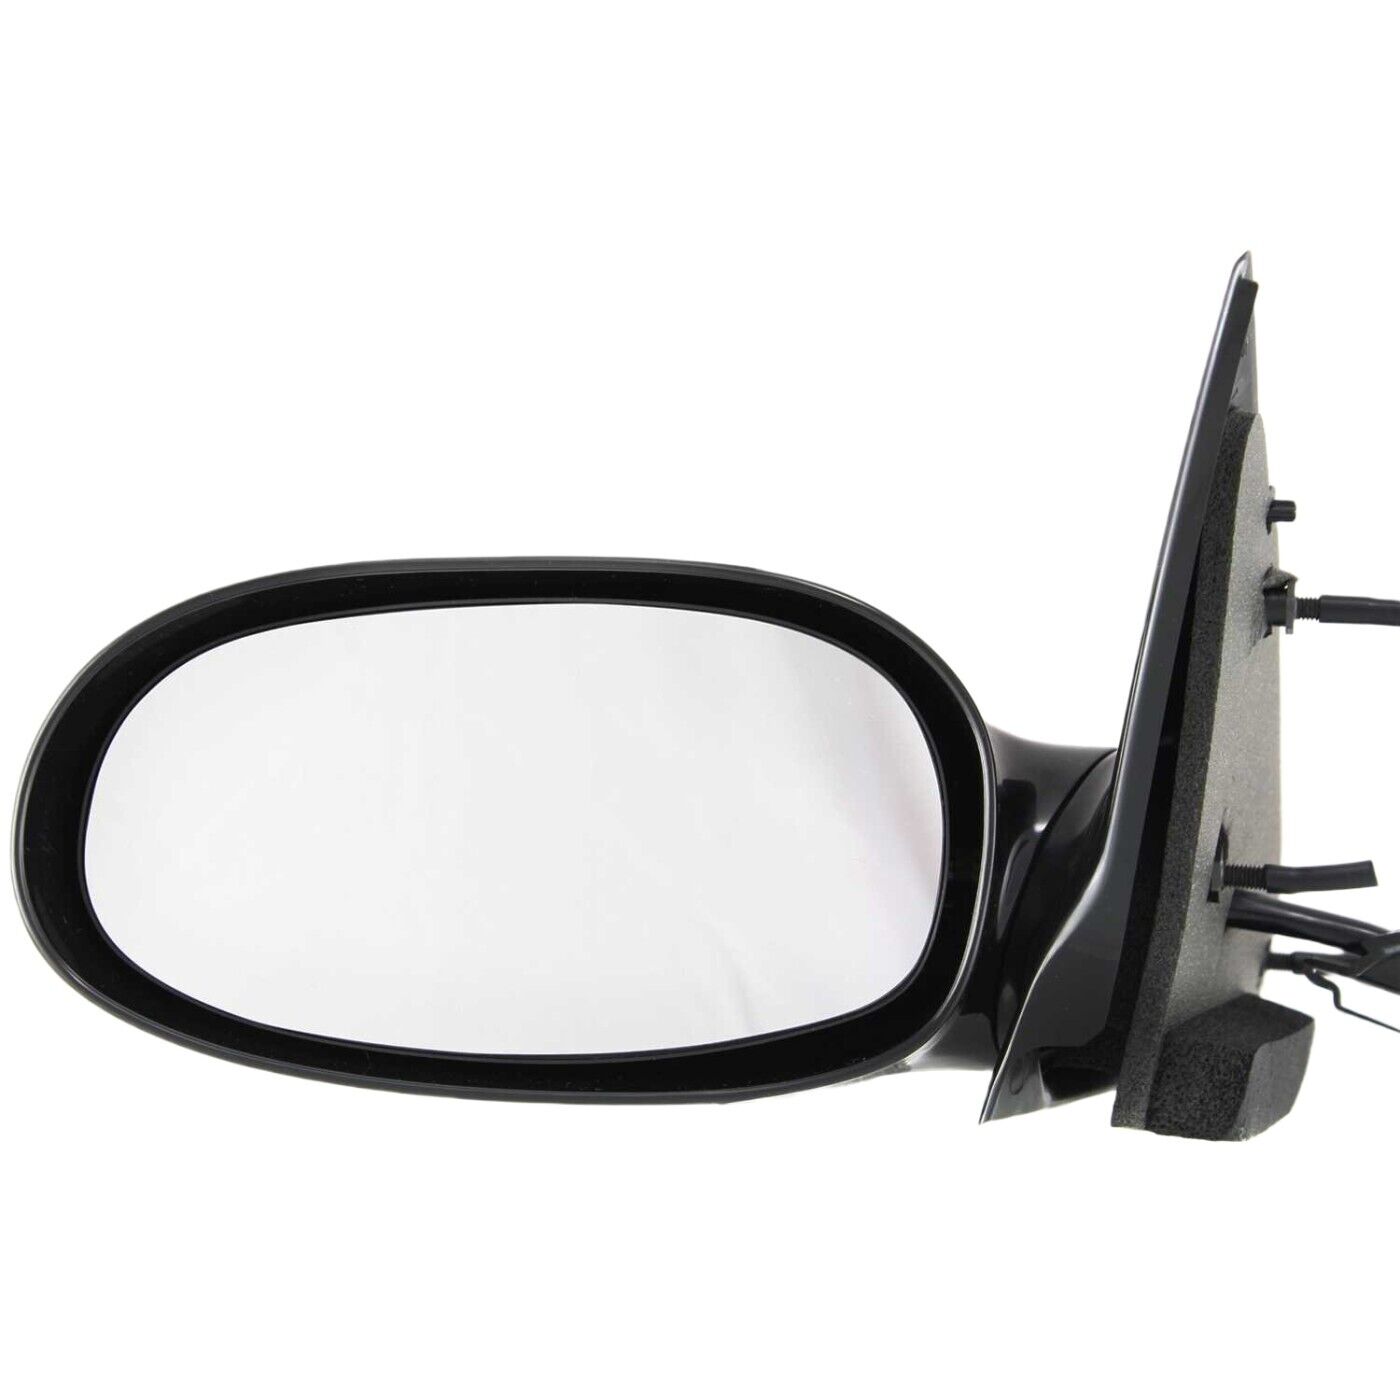 Manual Remote Mirror For 2001-2002 Saturn L100 Left Paint To Match